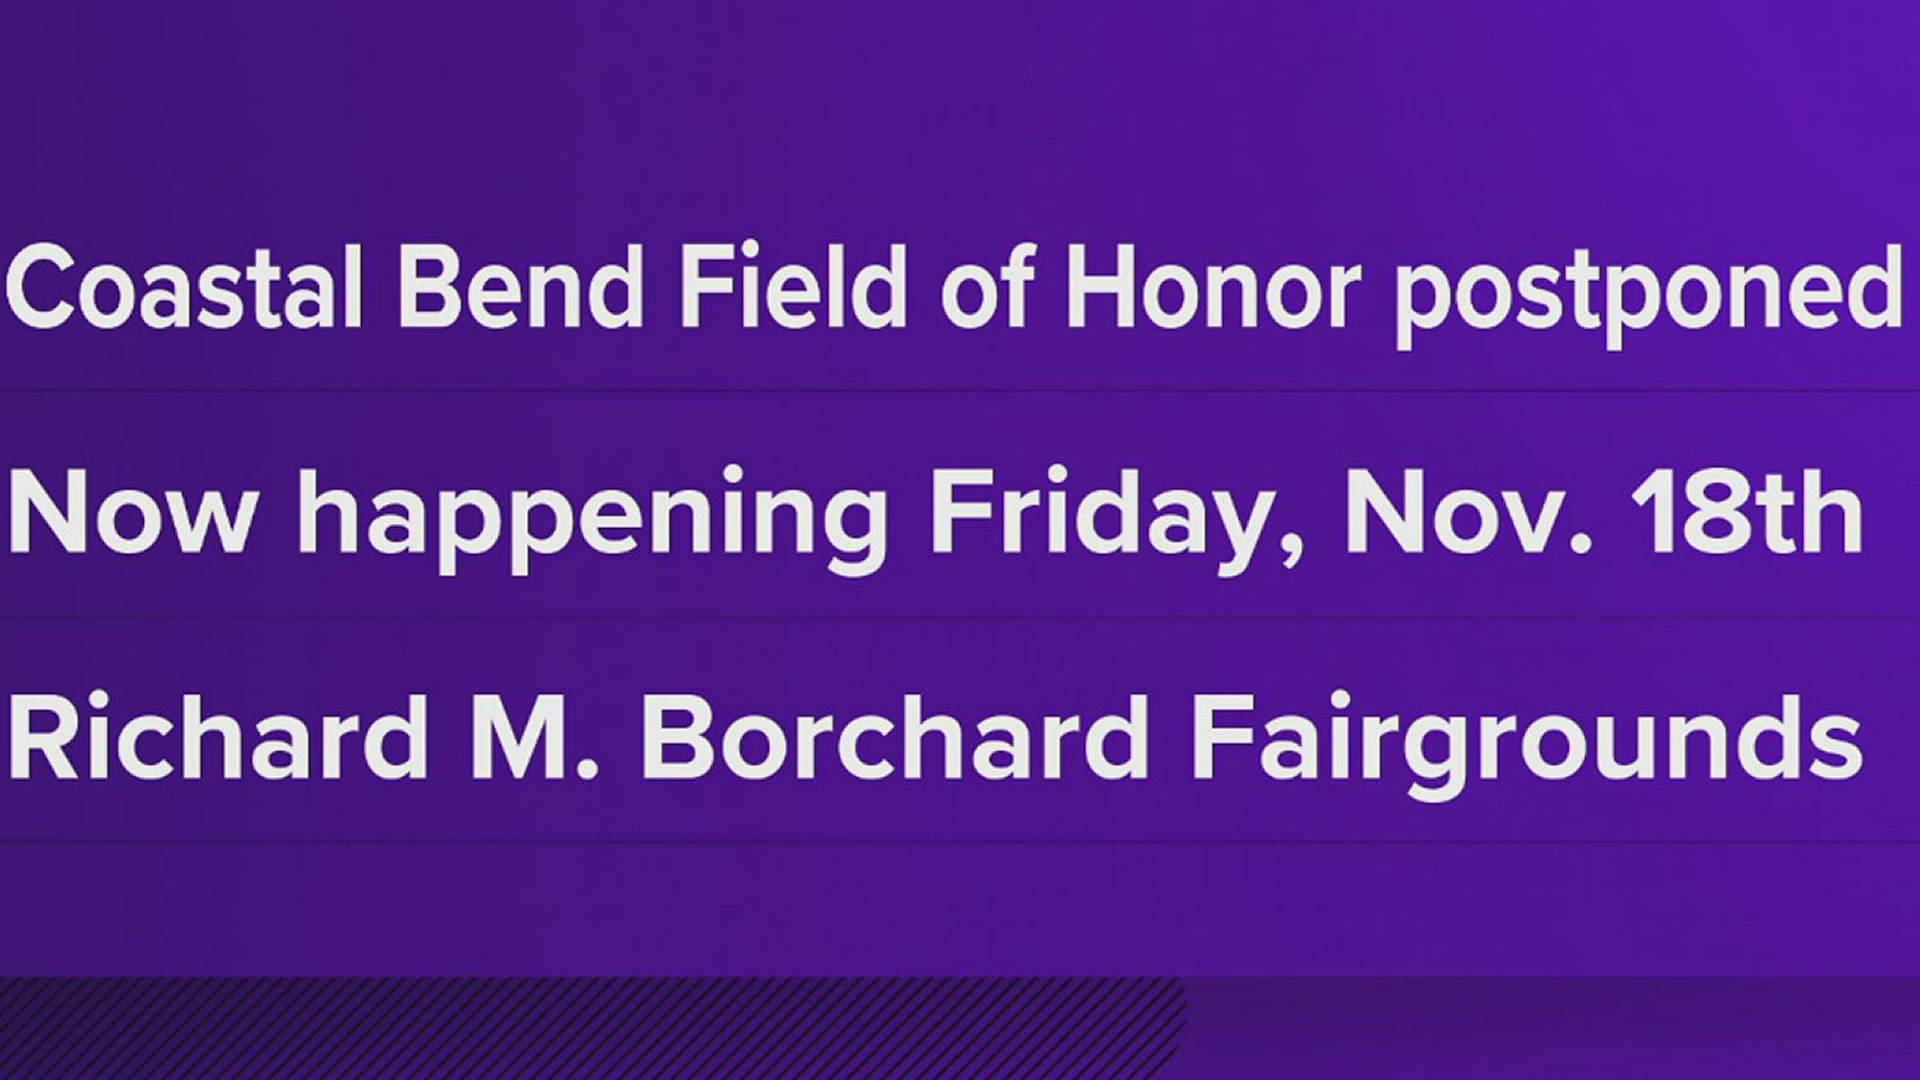 The event has been shifted to next Friday at the Richard M. Borchard Fairgrounds.